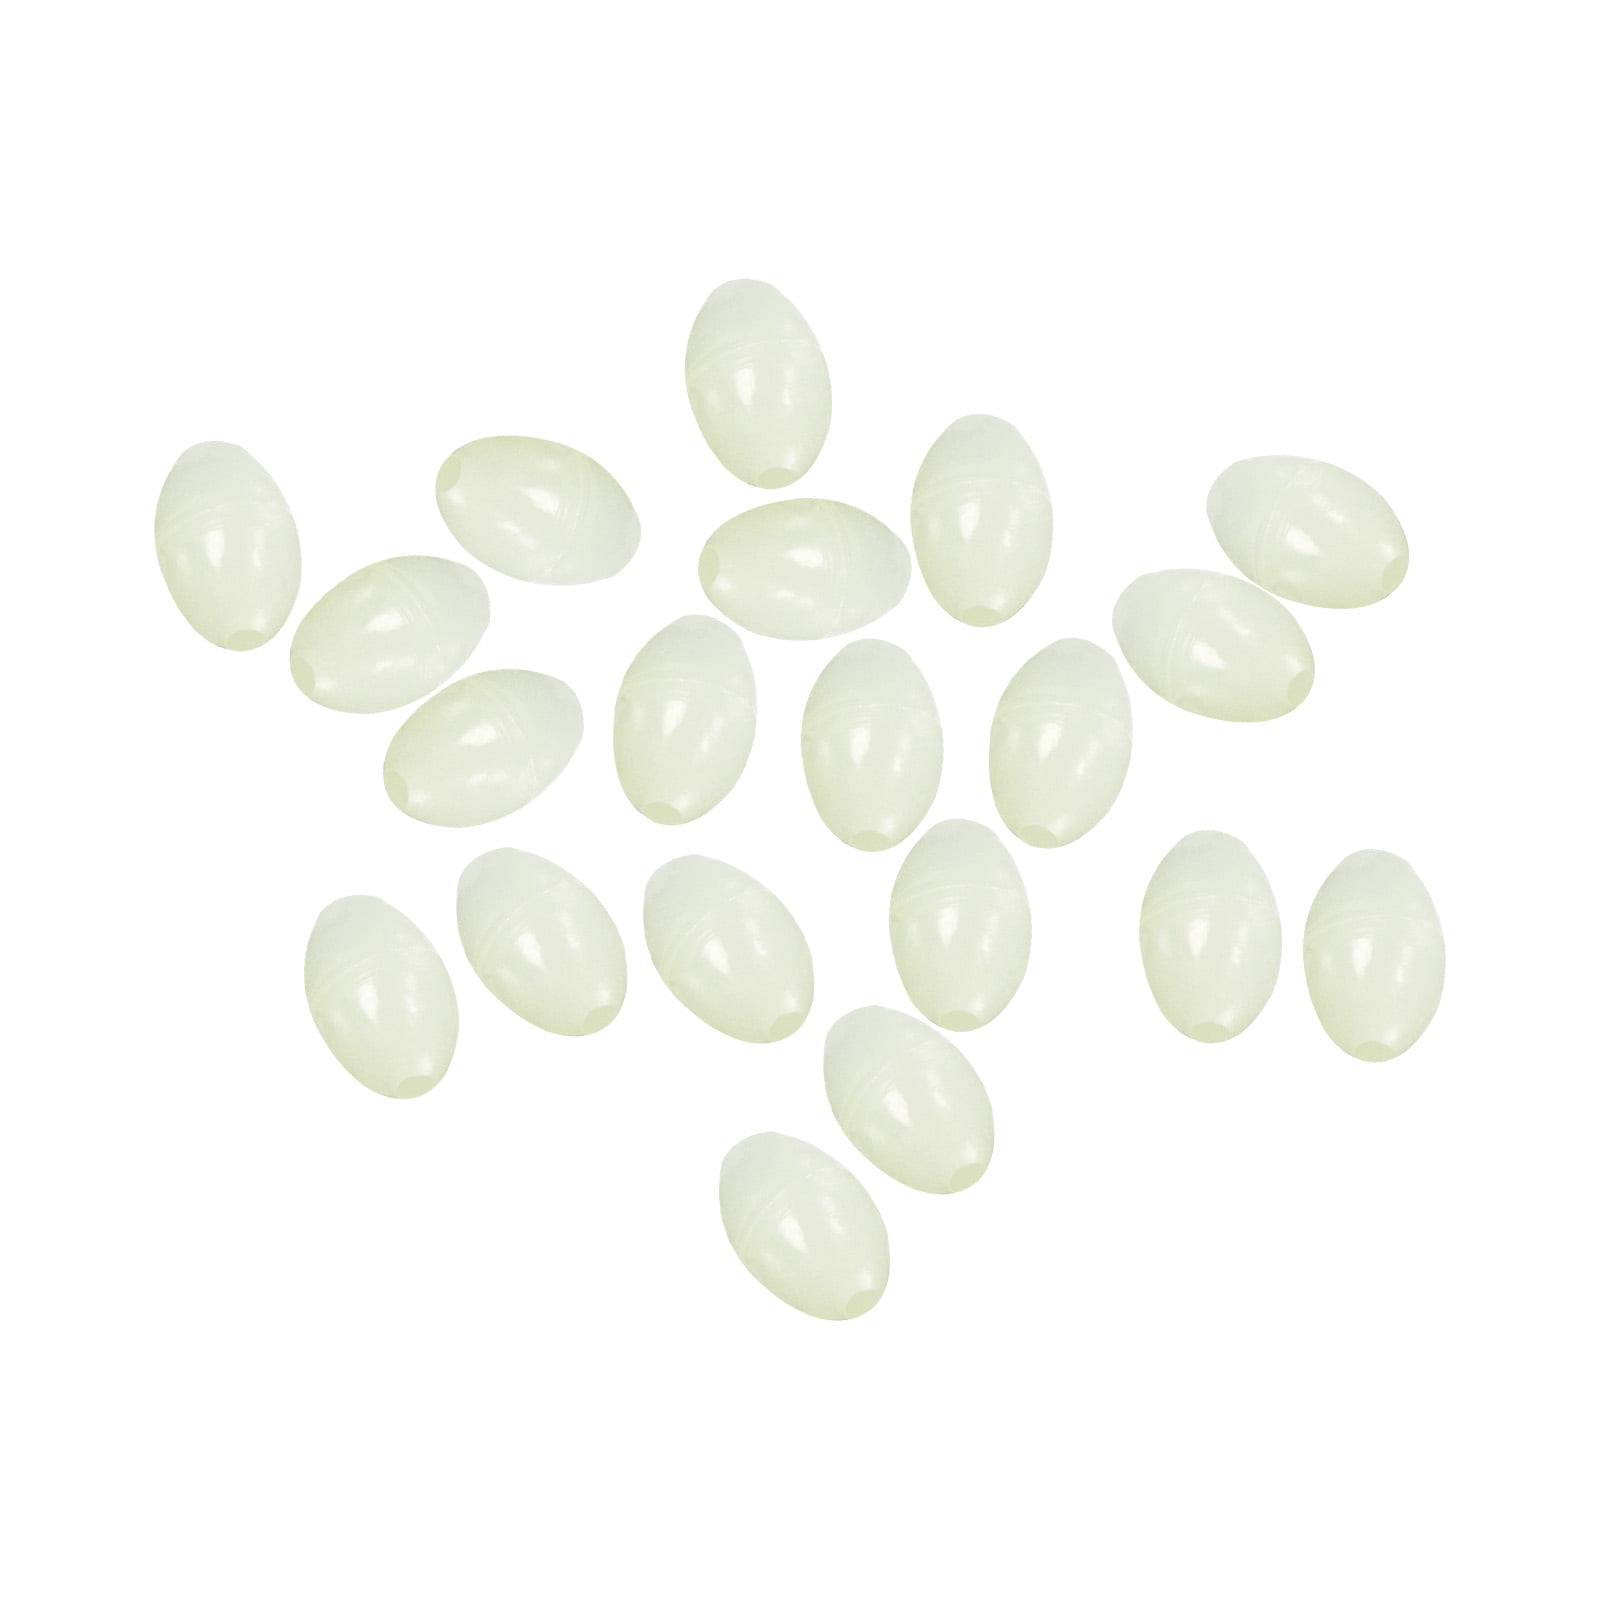 Uxcell 7x5mm Oval Soft Plastic Luminous Glow Fishing Beads Tackle Tool  White 200 Pieces 